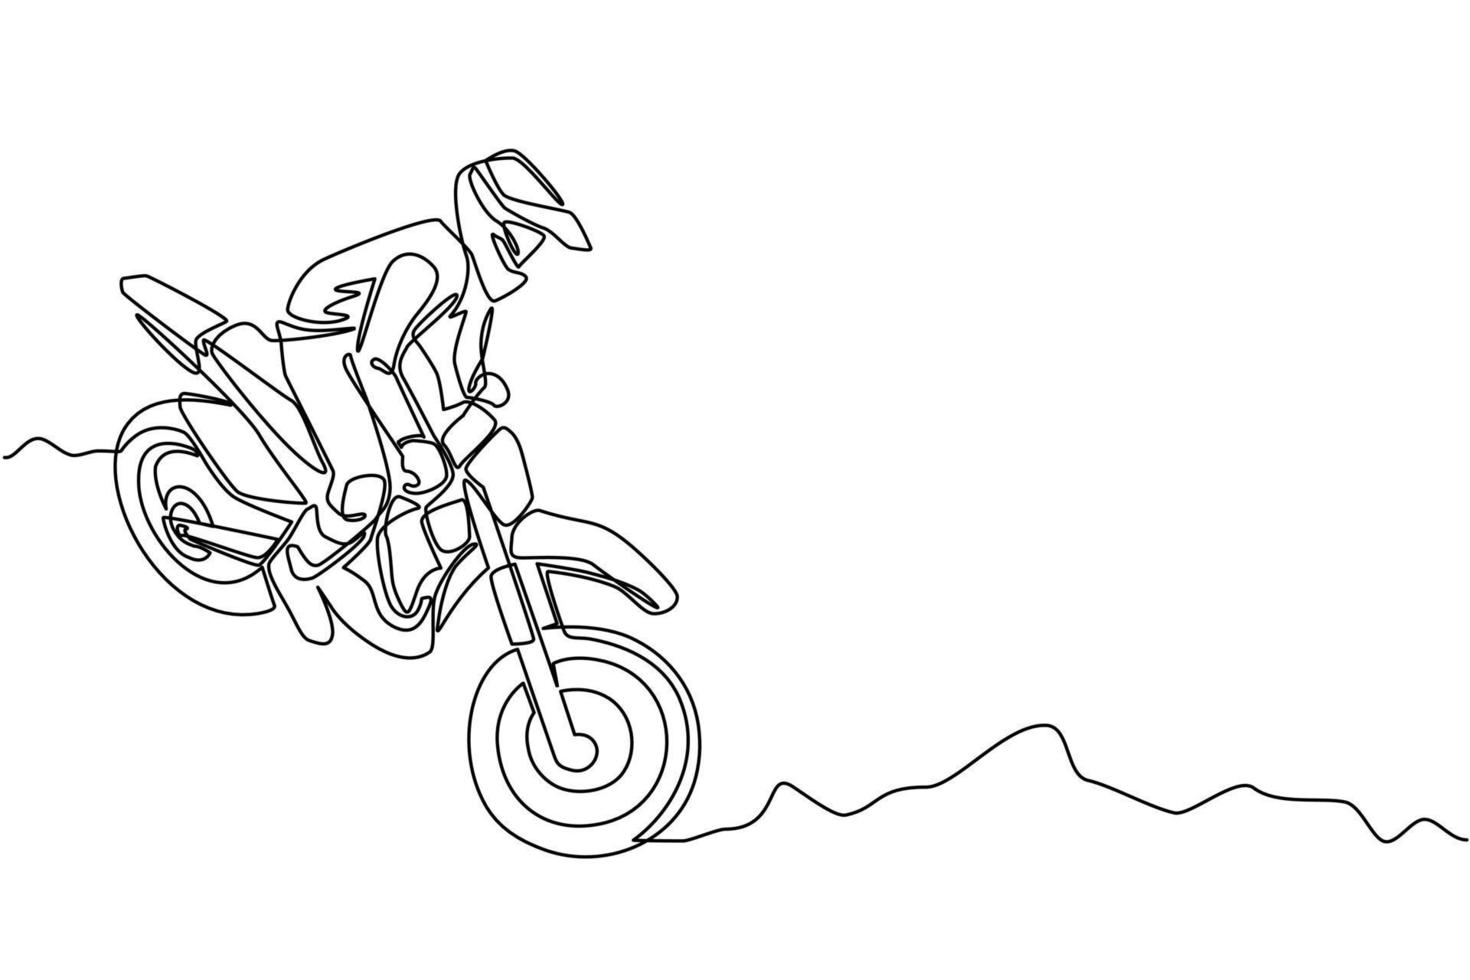 Continuous one line drawing young motocross rider ride motocross bike. Motocross motorcycle competition. Enduro, freestyle motocross extreme sport. Single line draw design vector graphic illustration